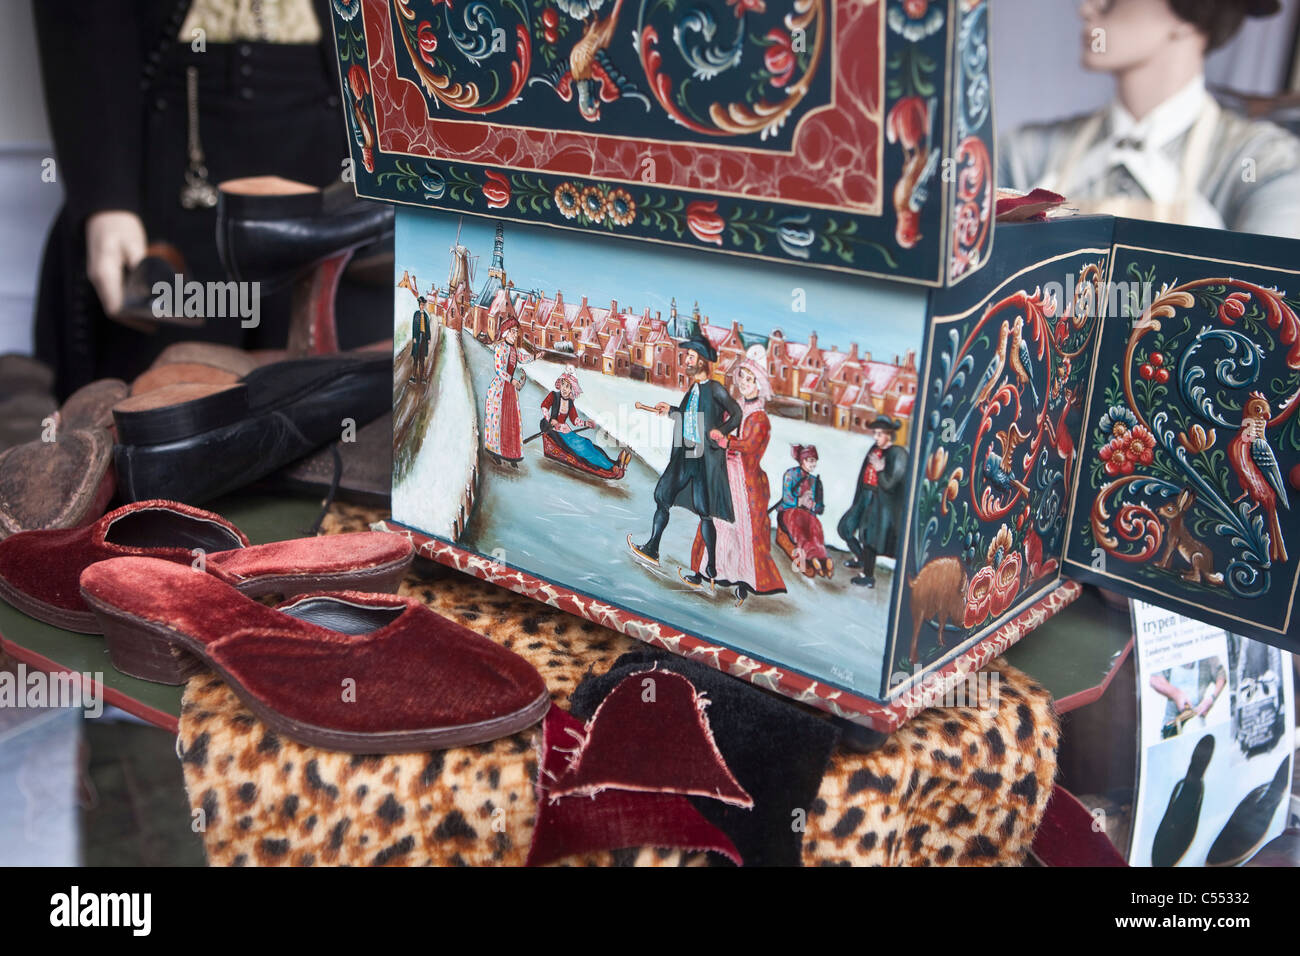 The Netherlands, Hindeloopen, Dutch capital of ice skating culture. Painting on wooden box in Skating or Skate Museum. Stock Photo